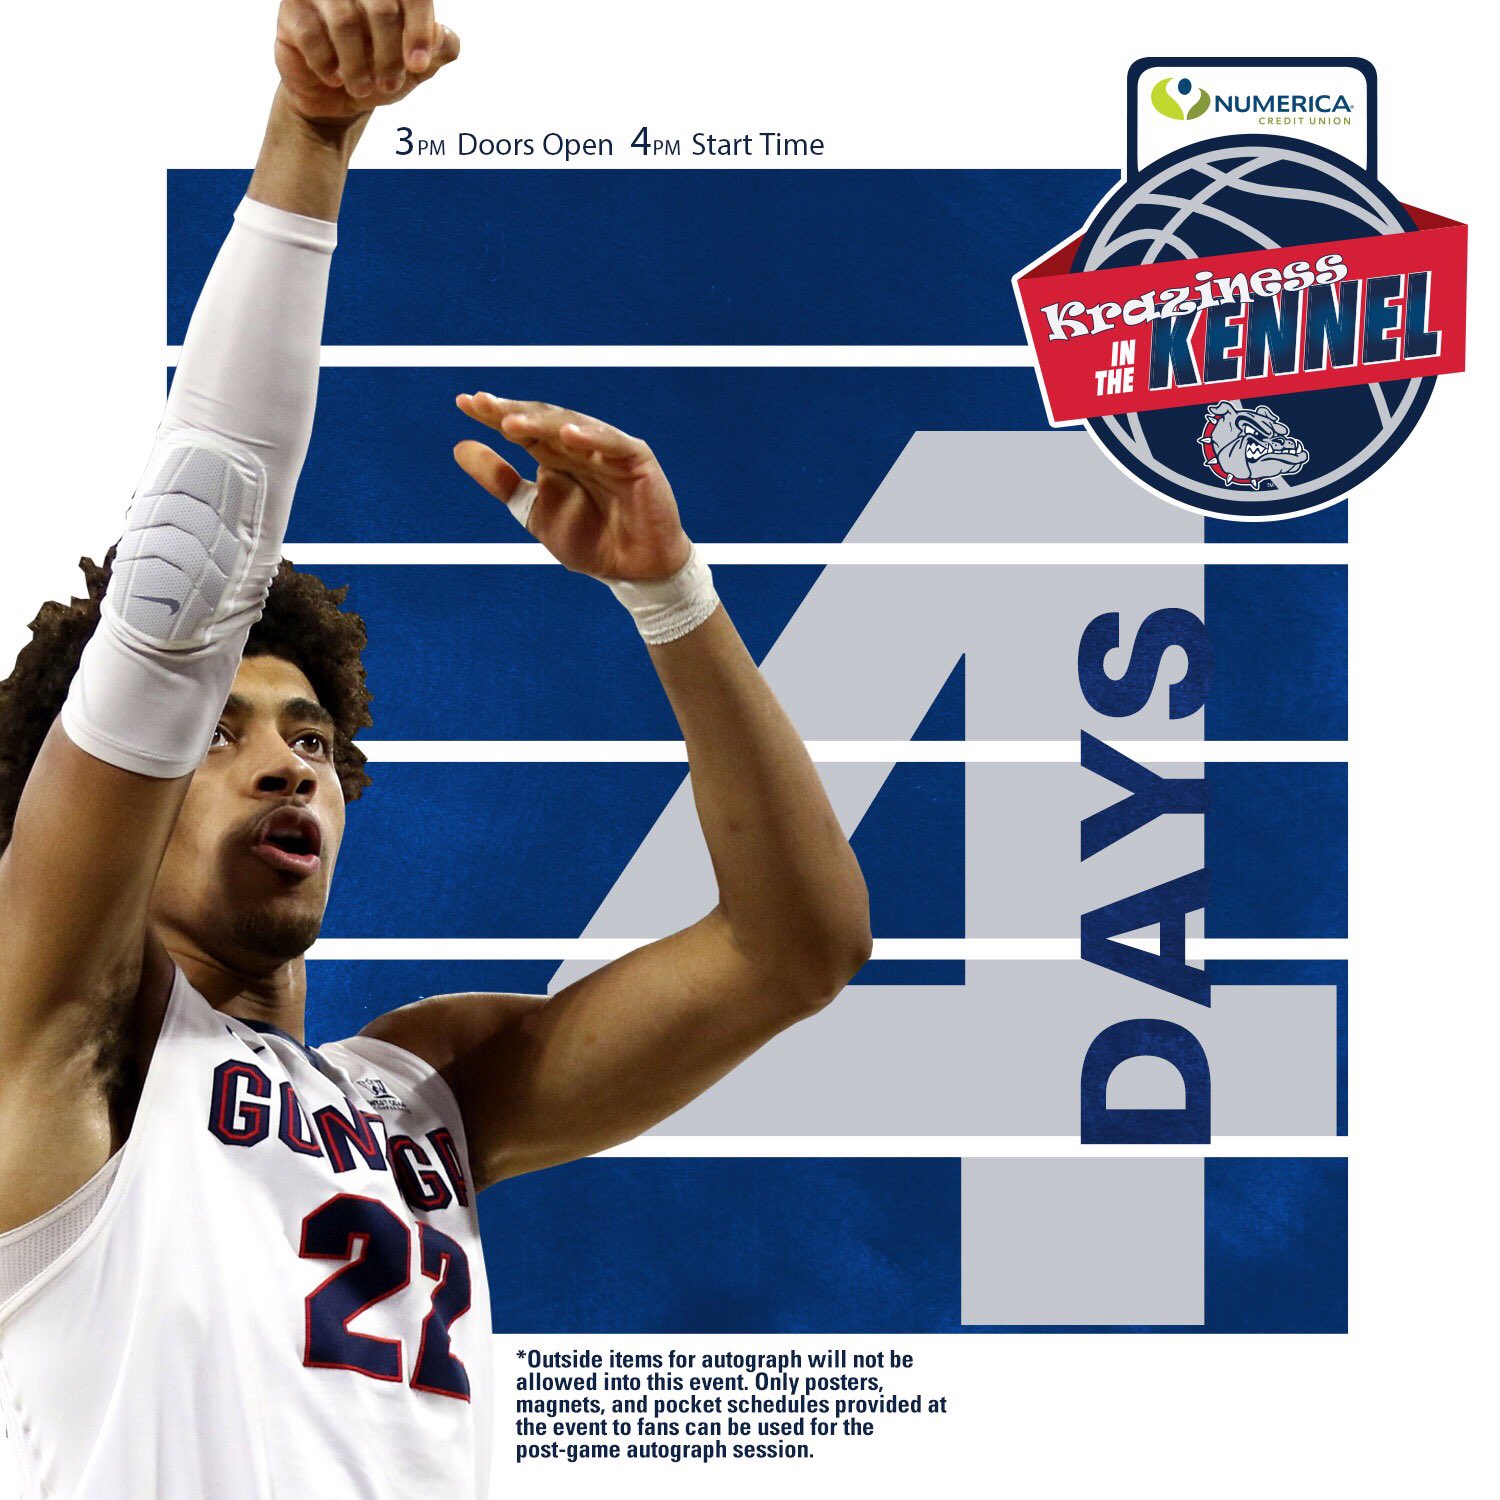 Gonzaga Basketball on Twitter "FOUR 👏🏼 MORE 👏🏼 DAYS 👏🏼 Numerica